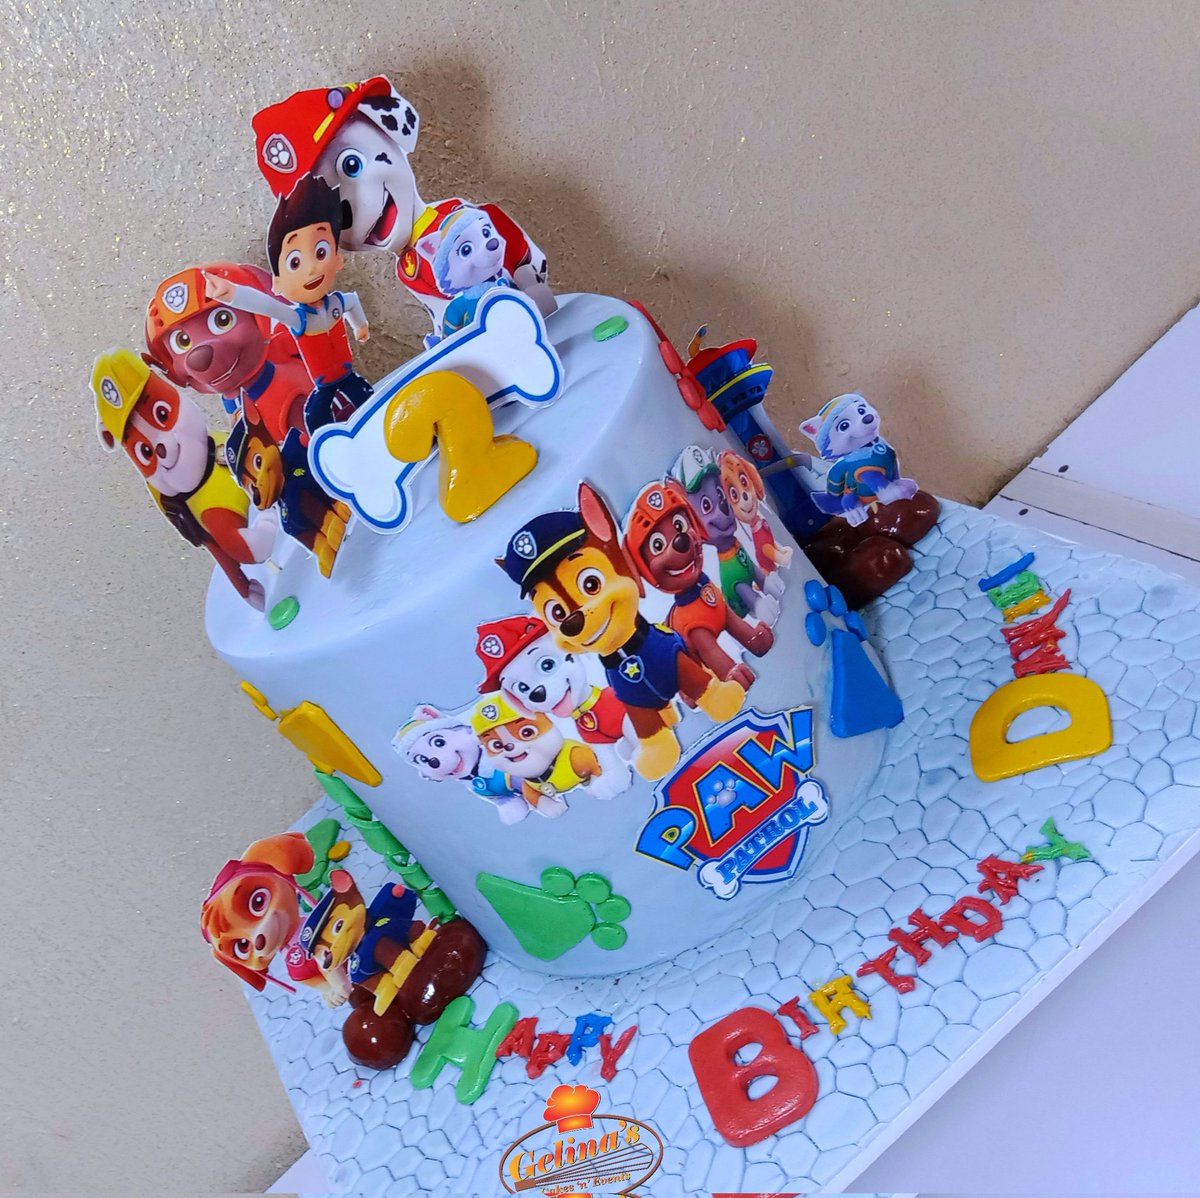 Caked for Daniel at 2...
    .
  
Good morning and wellcome to a brand new## day.
  We are taking orders: 08144538539
Location: Asaba Delta State.

#cakediva #gelinascakes #Anambrabaker #asabavendor #suprisesinasaba #bestcakesinasaba #food 

#EndSARS  #Shib